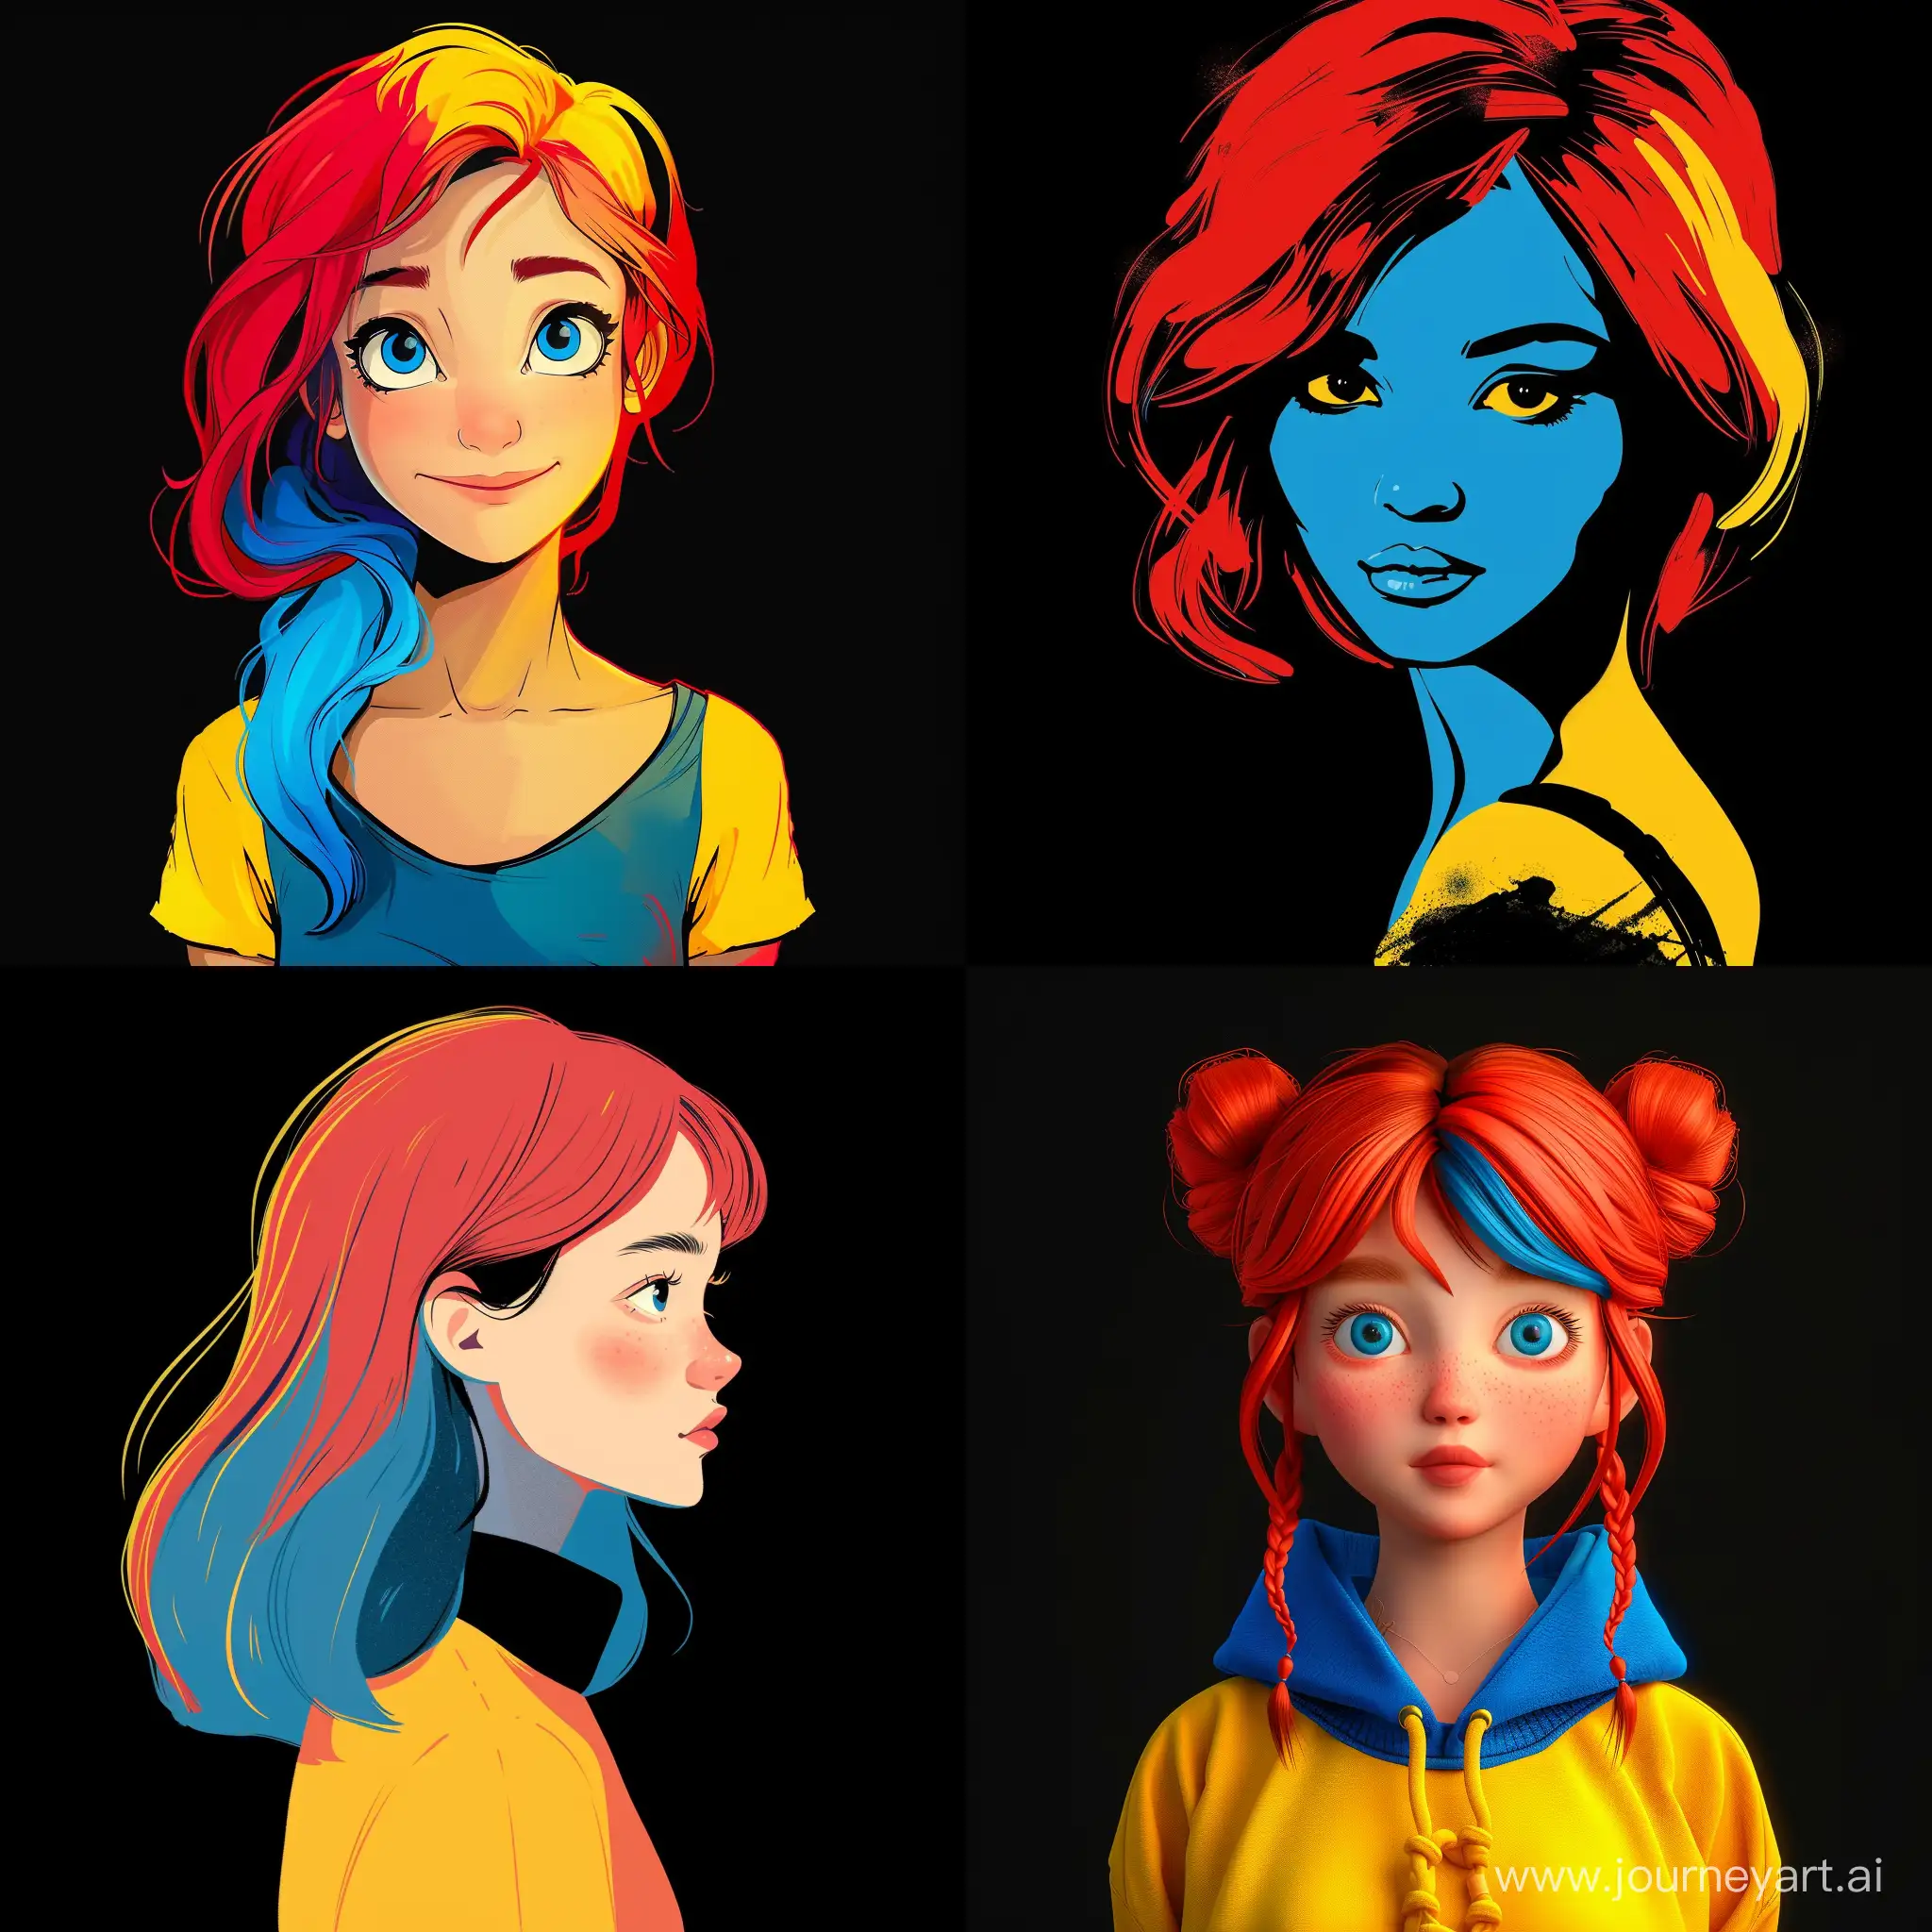 vibrant [red, blue, yellow][young woman], cartoon cute 2d, beautiful colors, contrast with black background